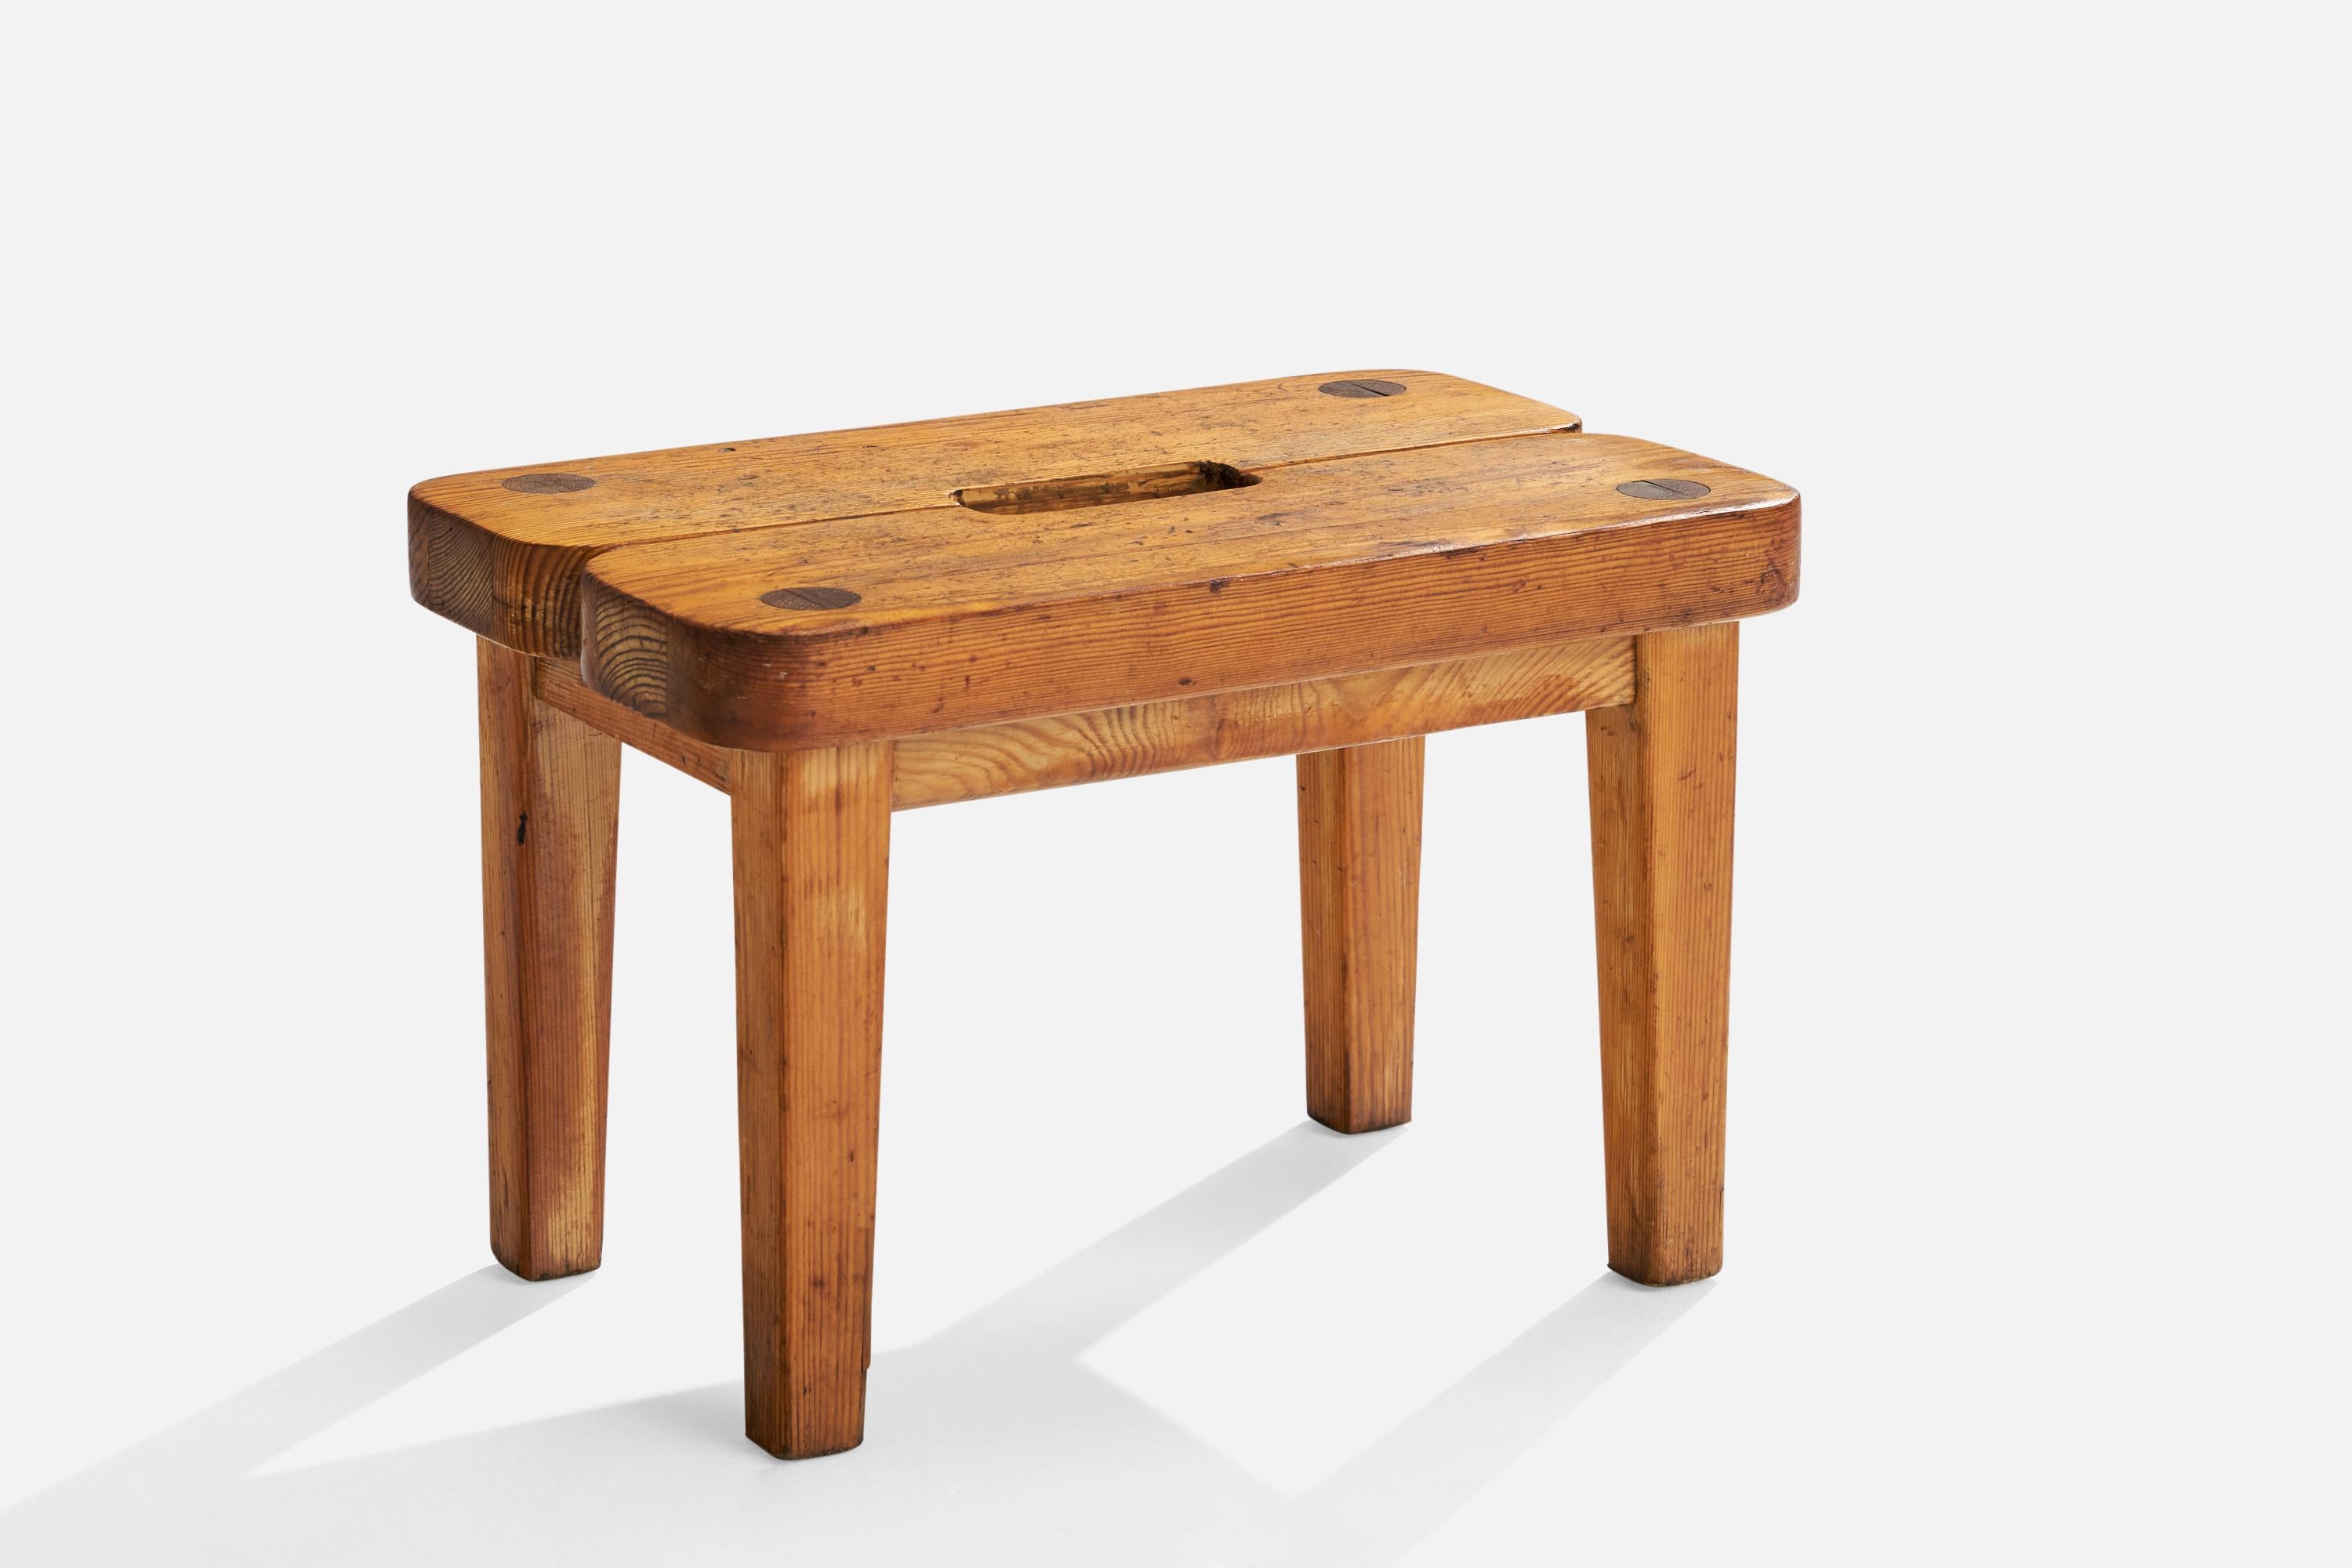 A small pine stool designed and produced in Sweden, 1940s.

seat height 10.5”